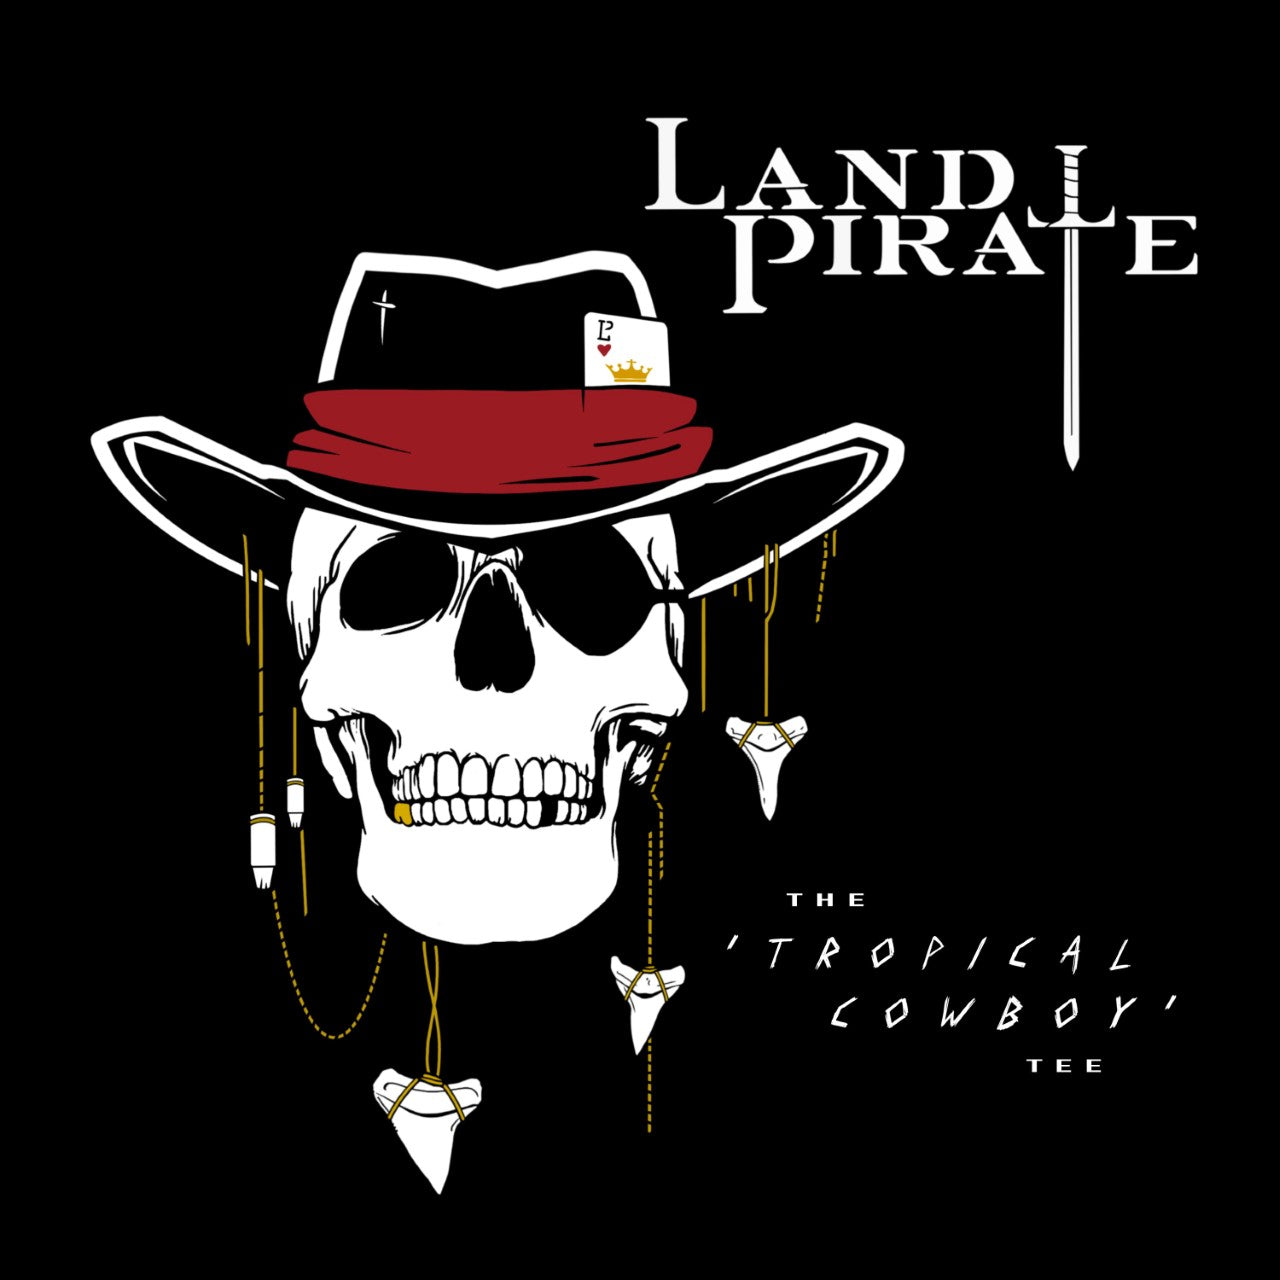 the 'Tropical Cowboy' - Land Pirate 